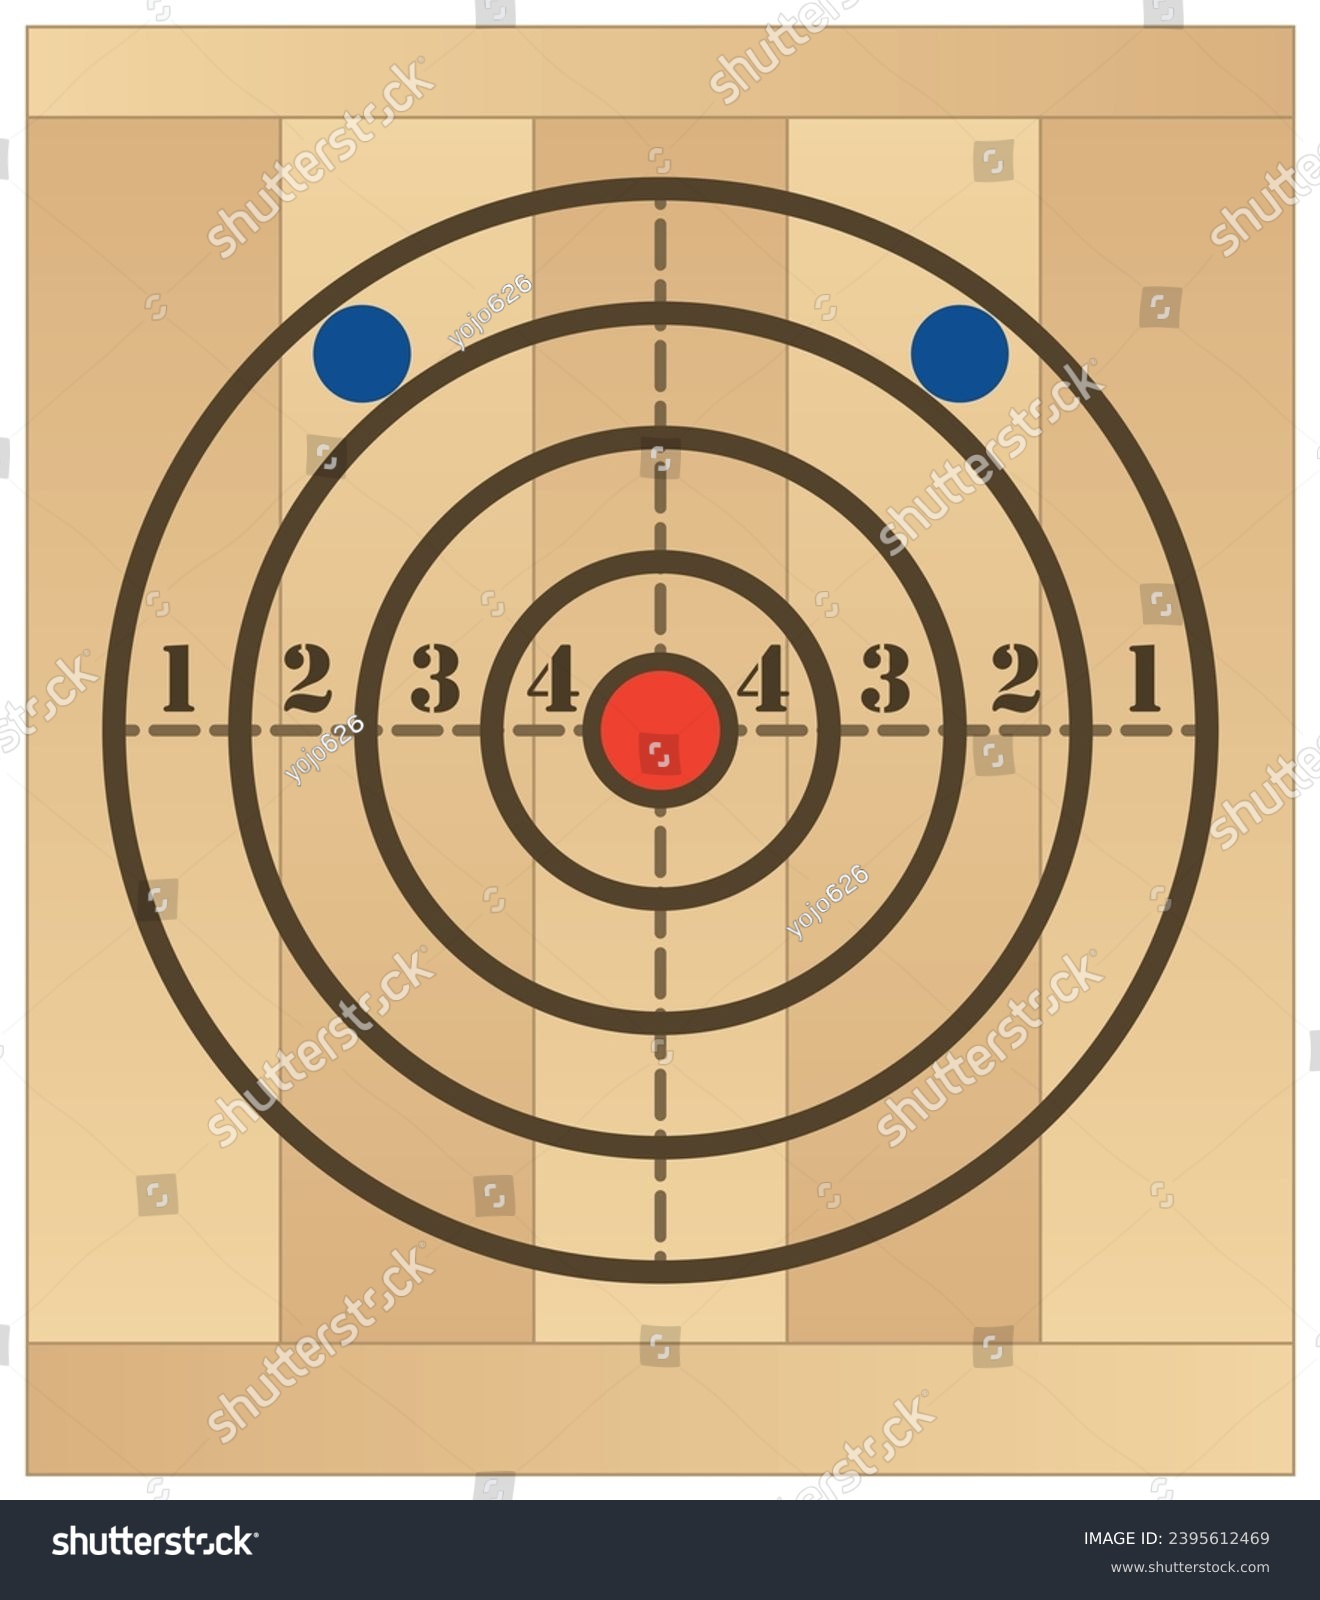 SVG of axe throwing, wooden target showing bullseye svg